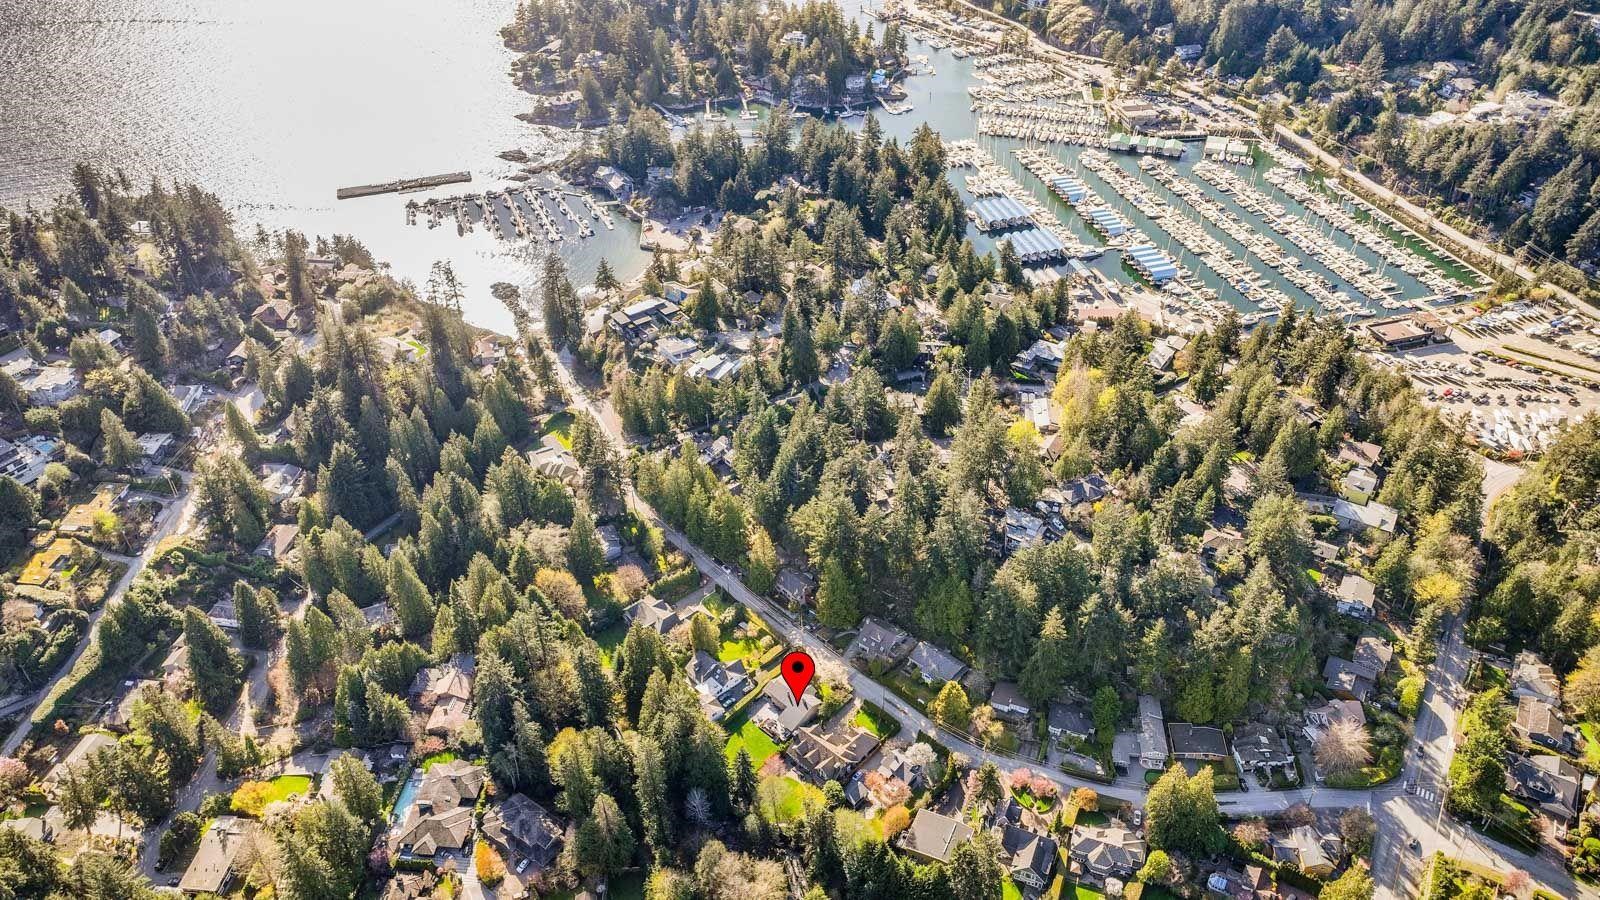 Listing image of 5656 EAGLE HARBOUR ROAD